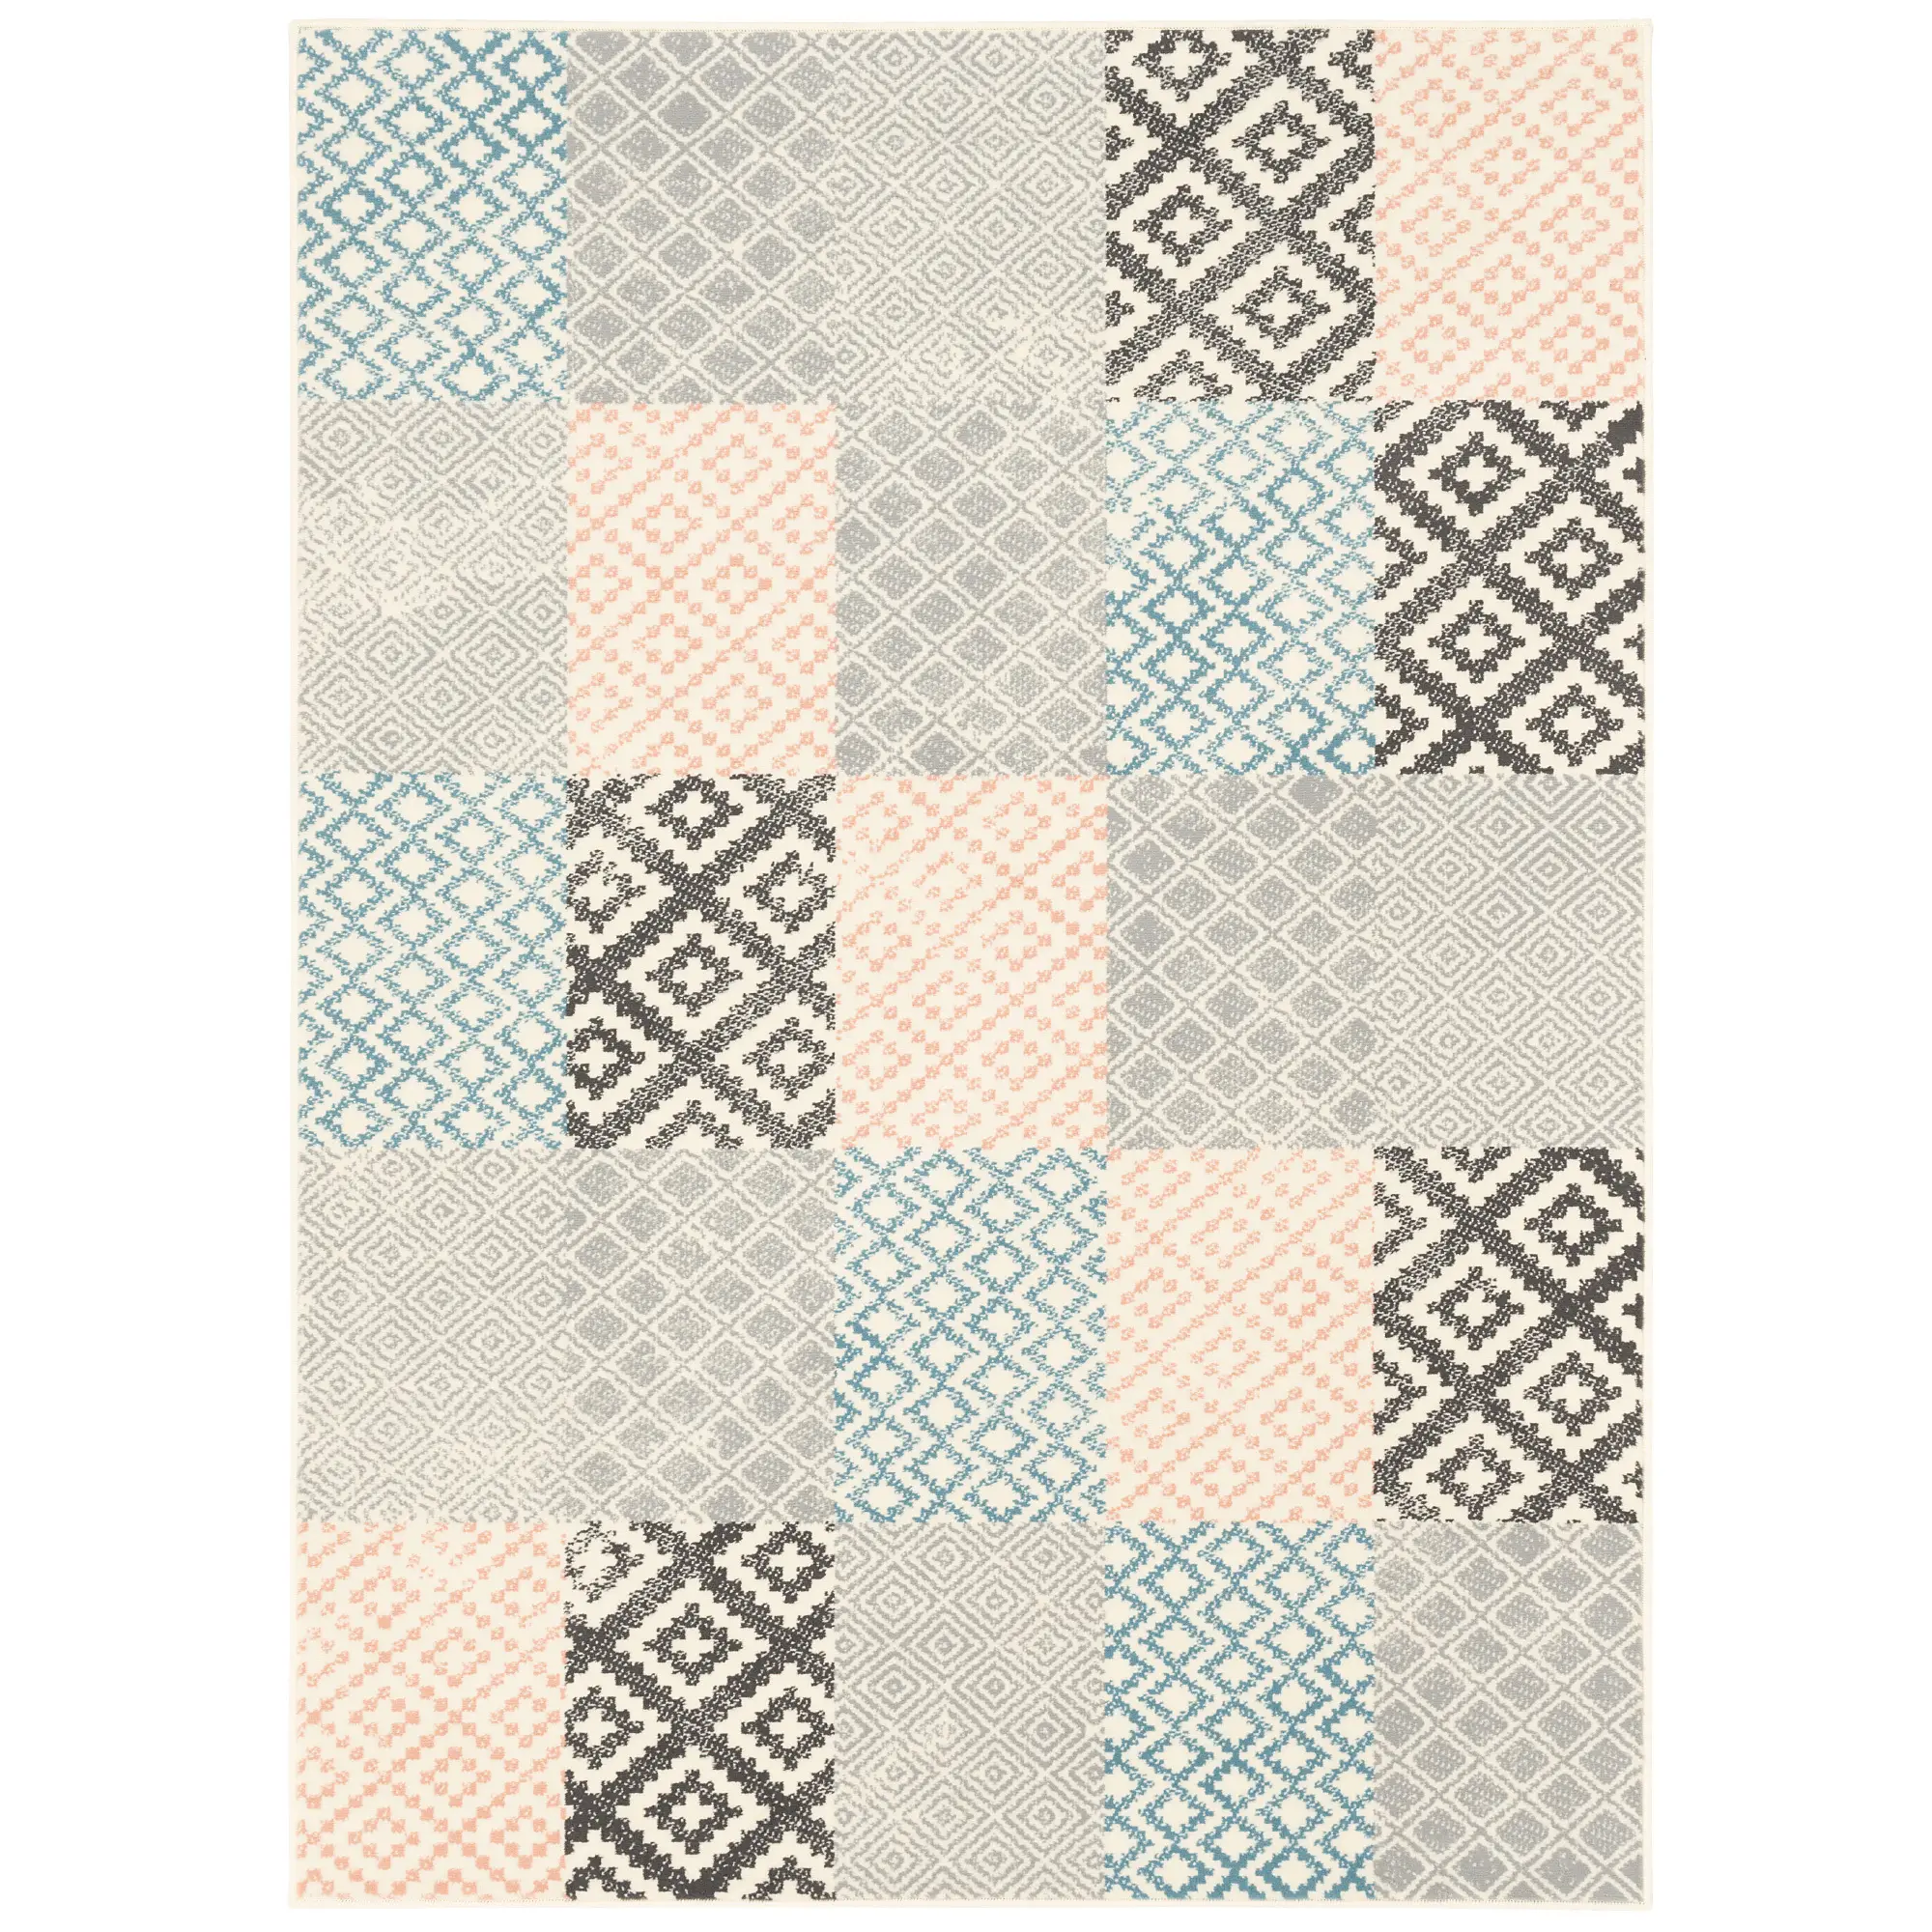 Pastell Passion Patchwork Teppich